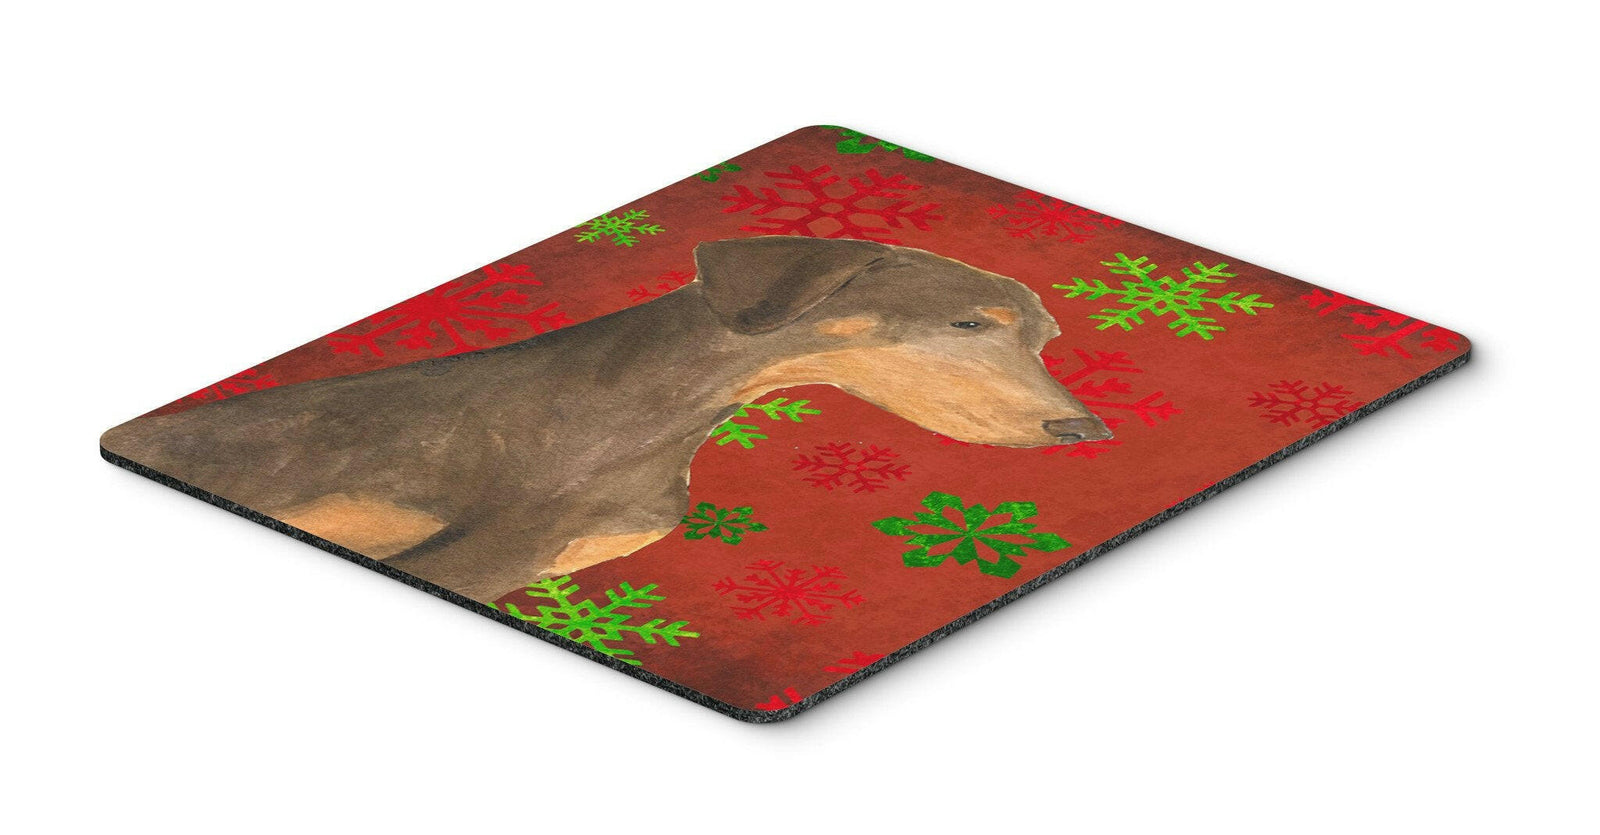 Doberman Red and Green Snowflakes Christmas Mouse Pad, Hot Pad or Trivet by Caroline's Treasures